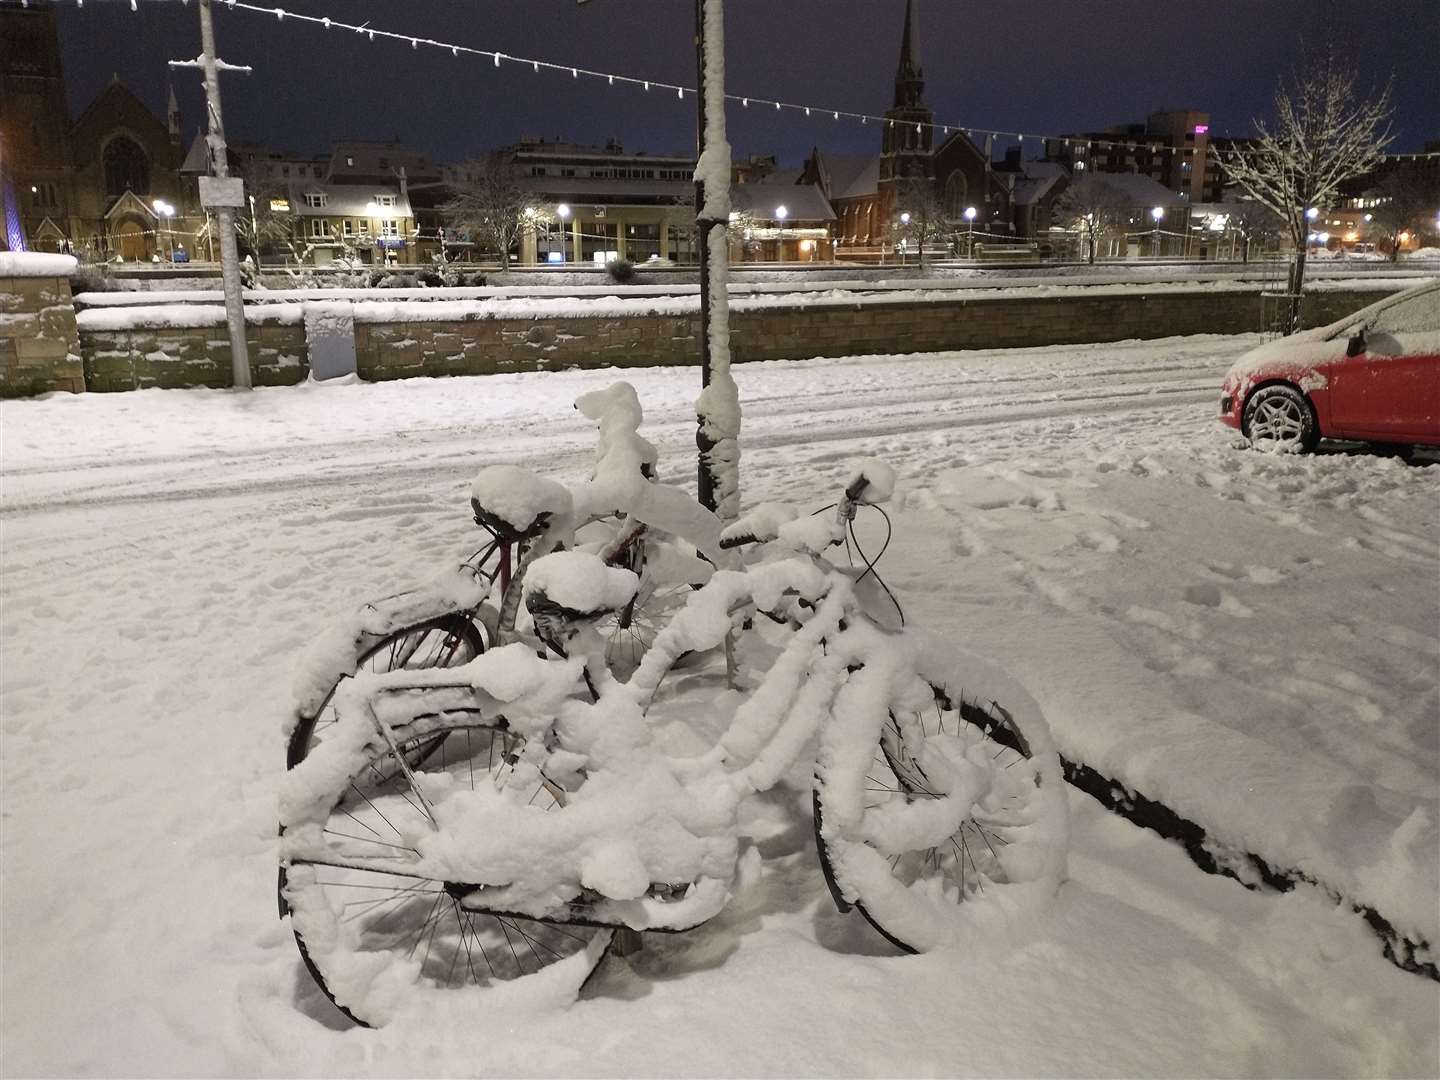 Wintry weather was impacting various modes of transport this week.